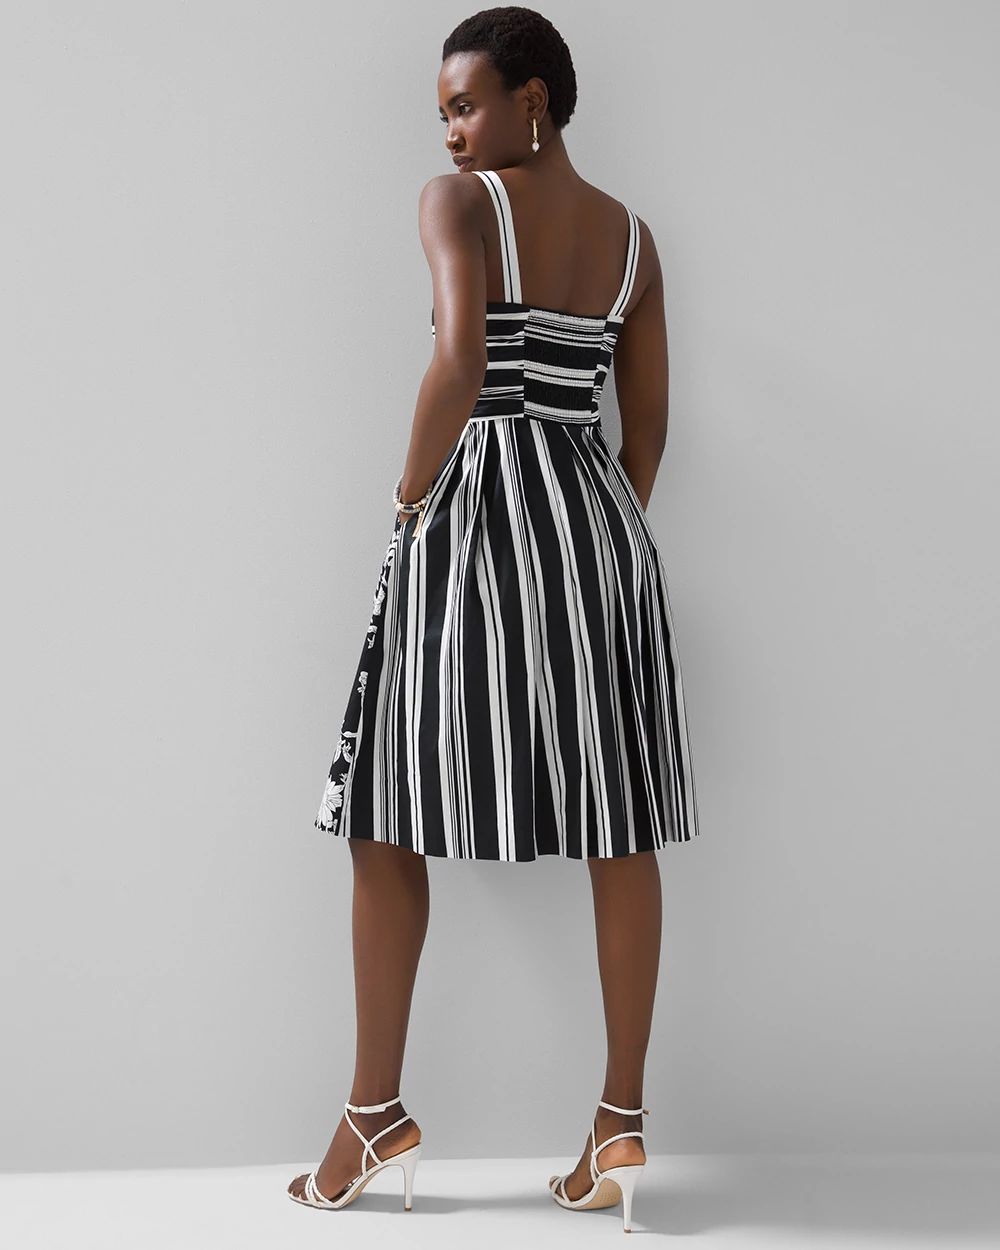 Black + White Poplin Fit & Flare Dress click to view larger image.